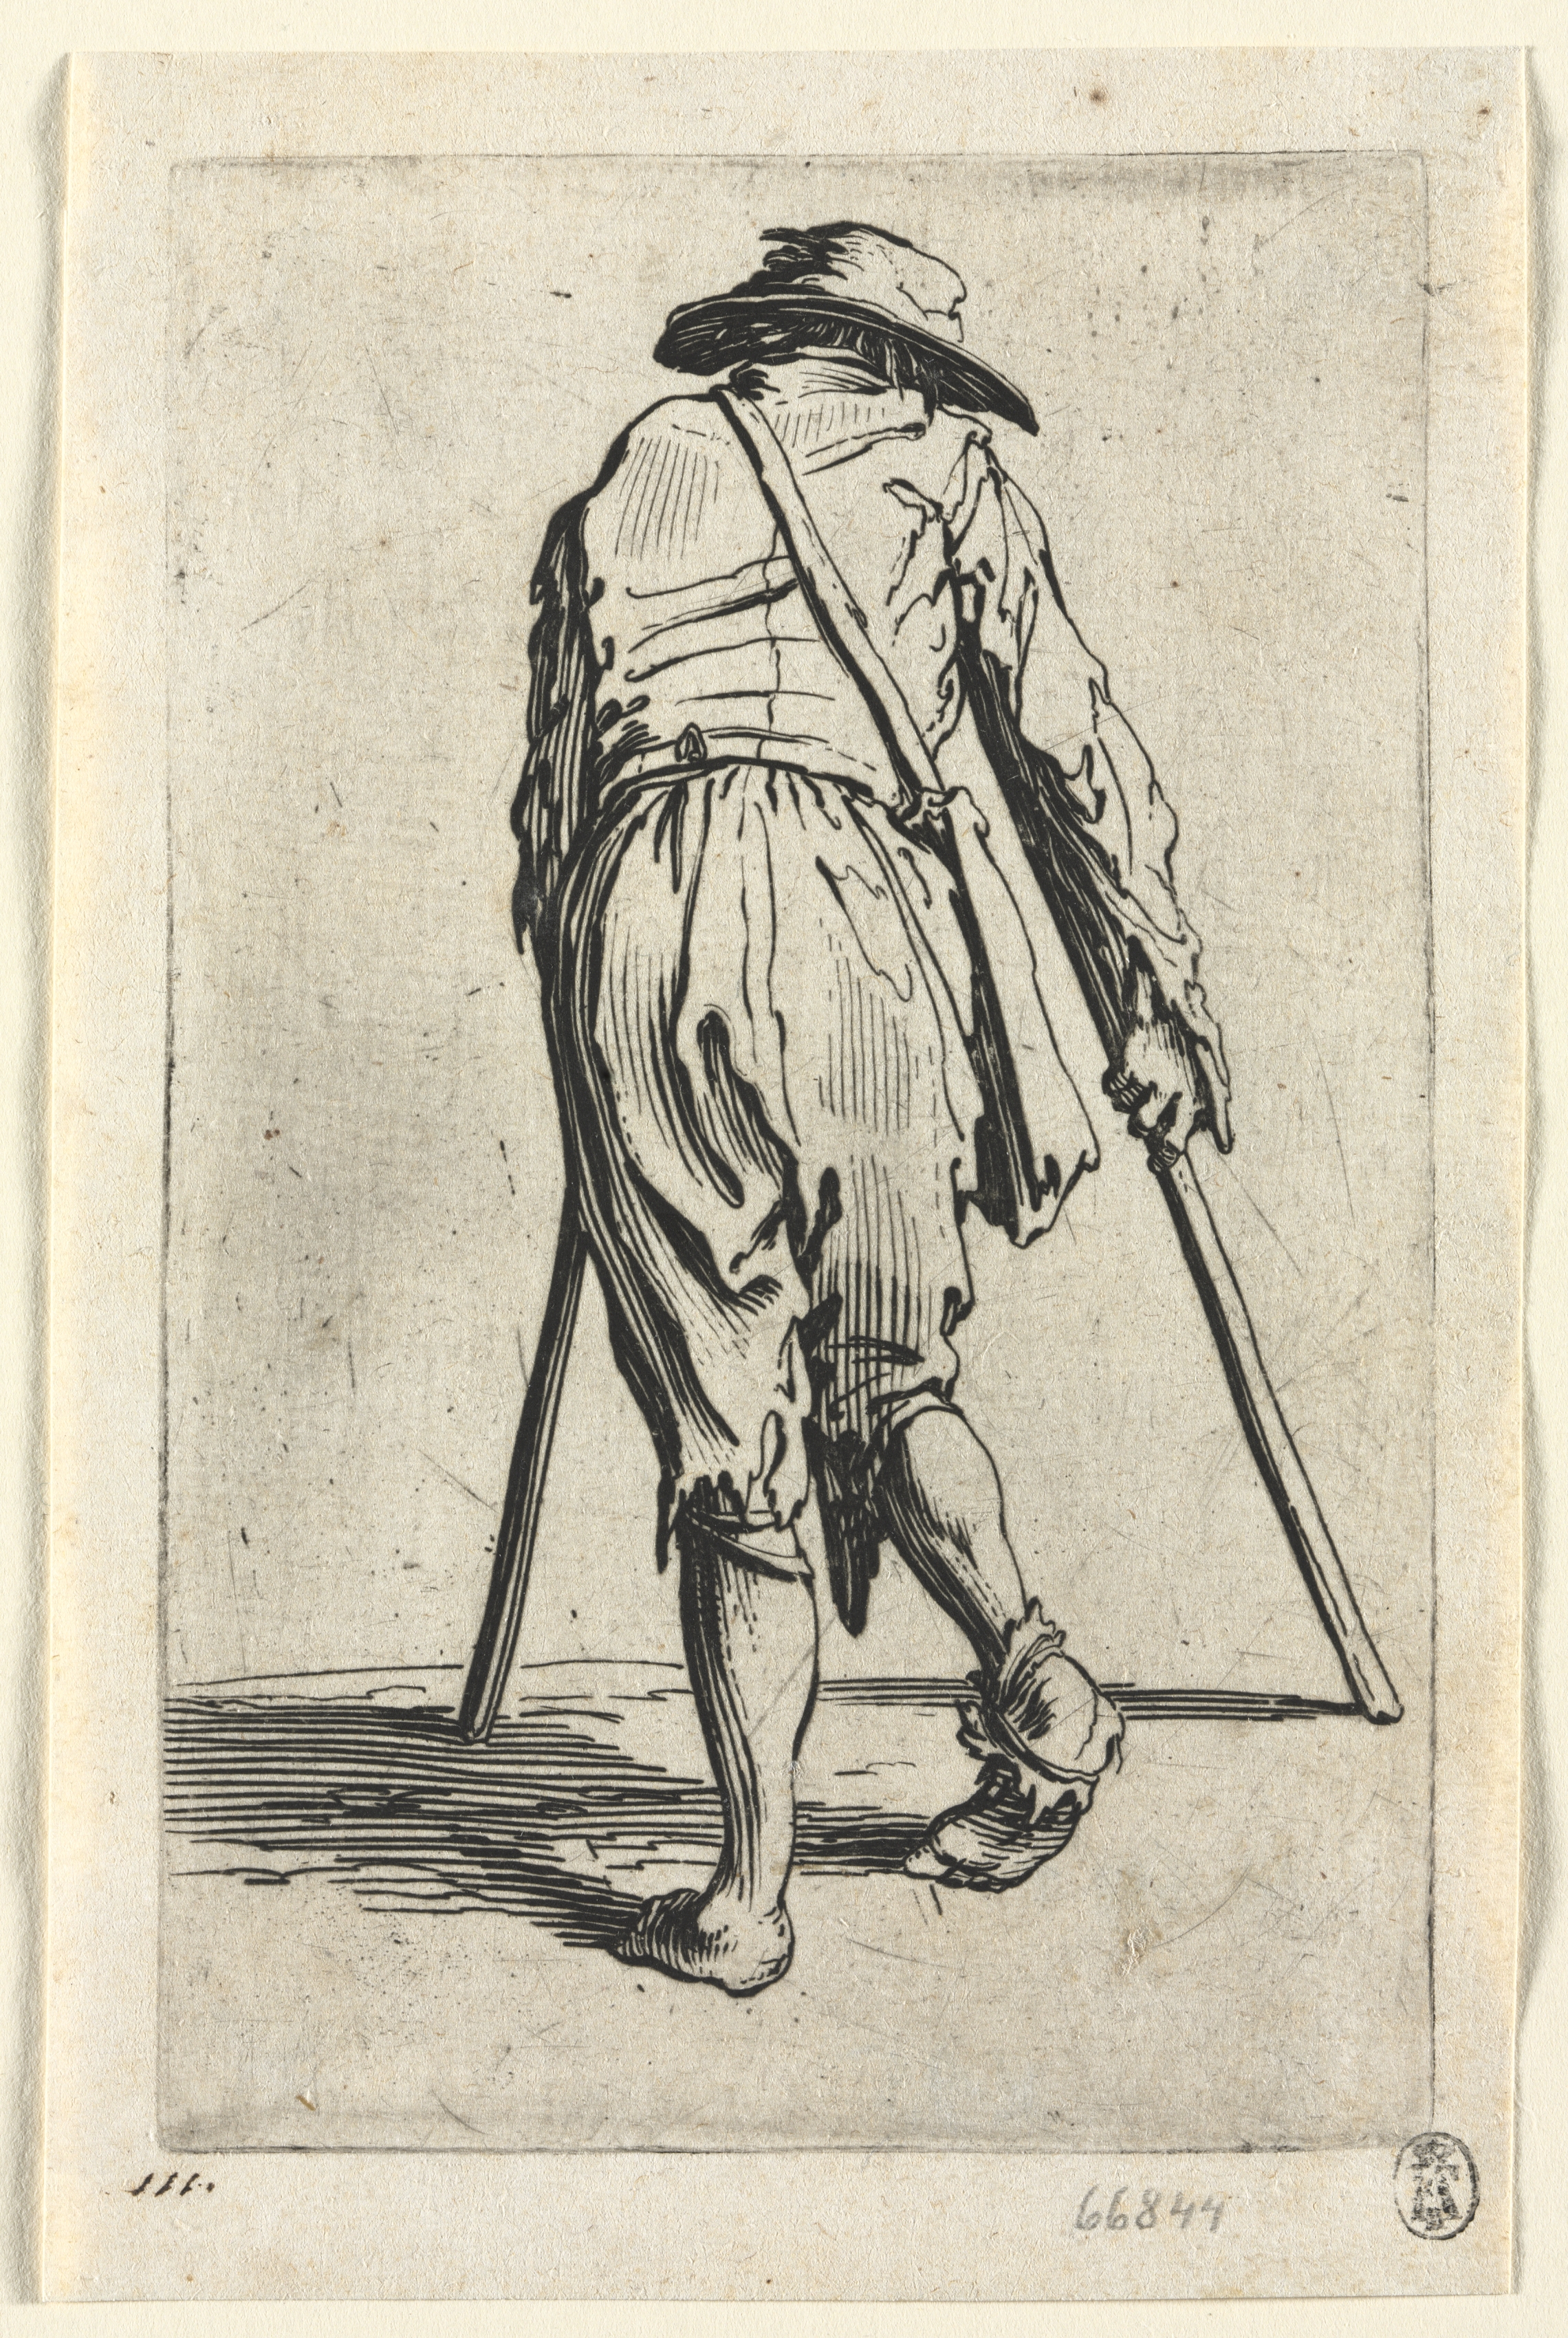 The Beggars: Beggar on Crutches, Wearing a Hat